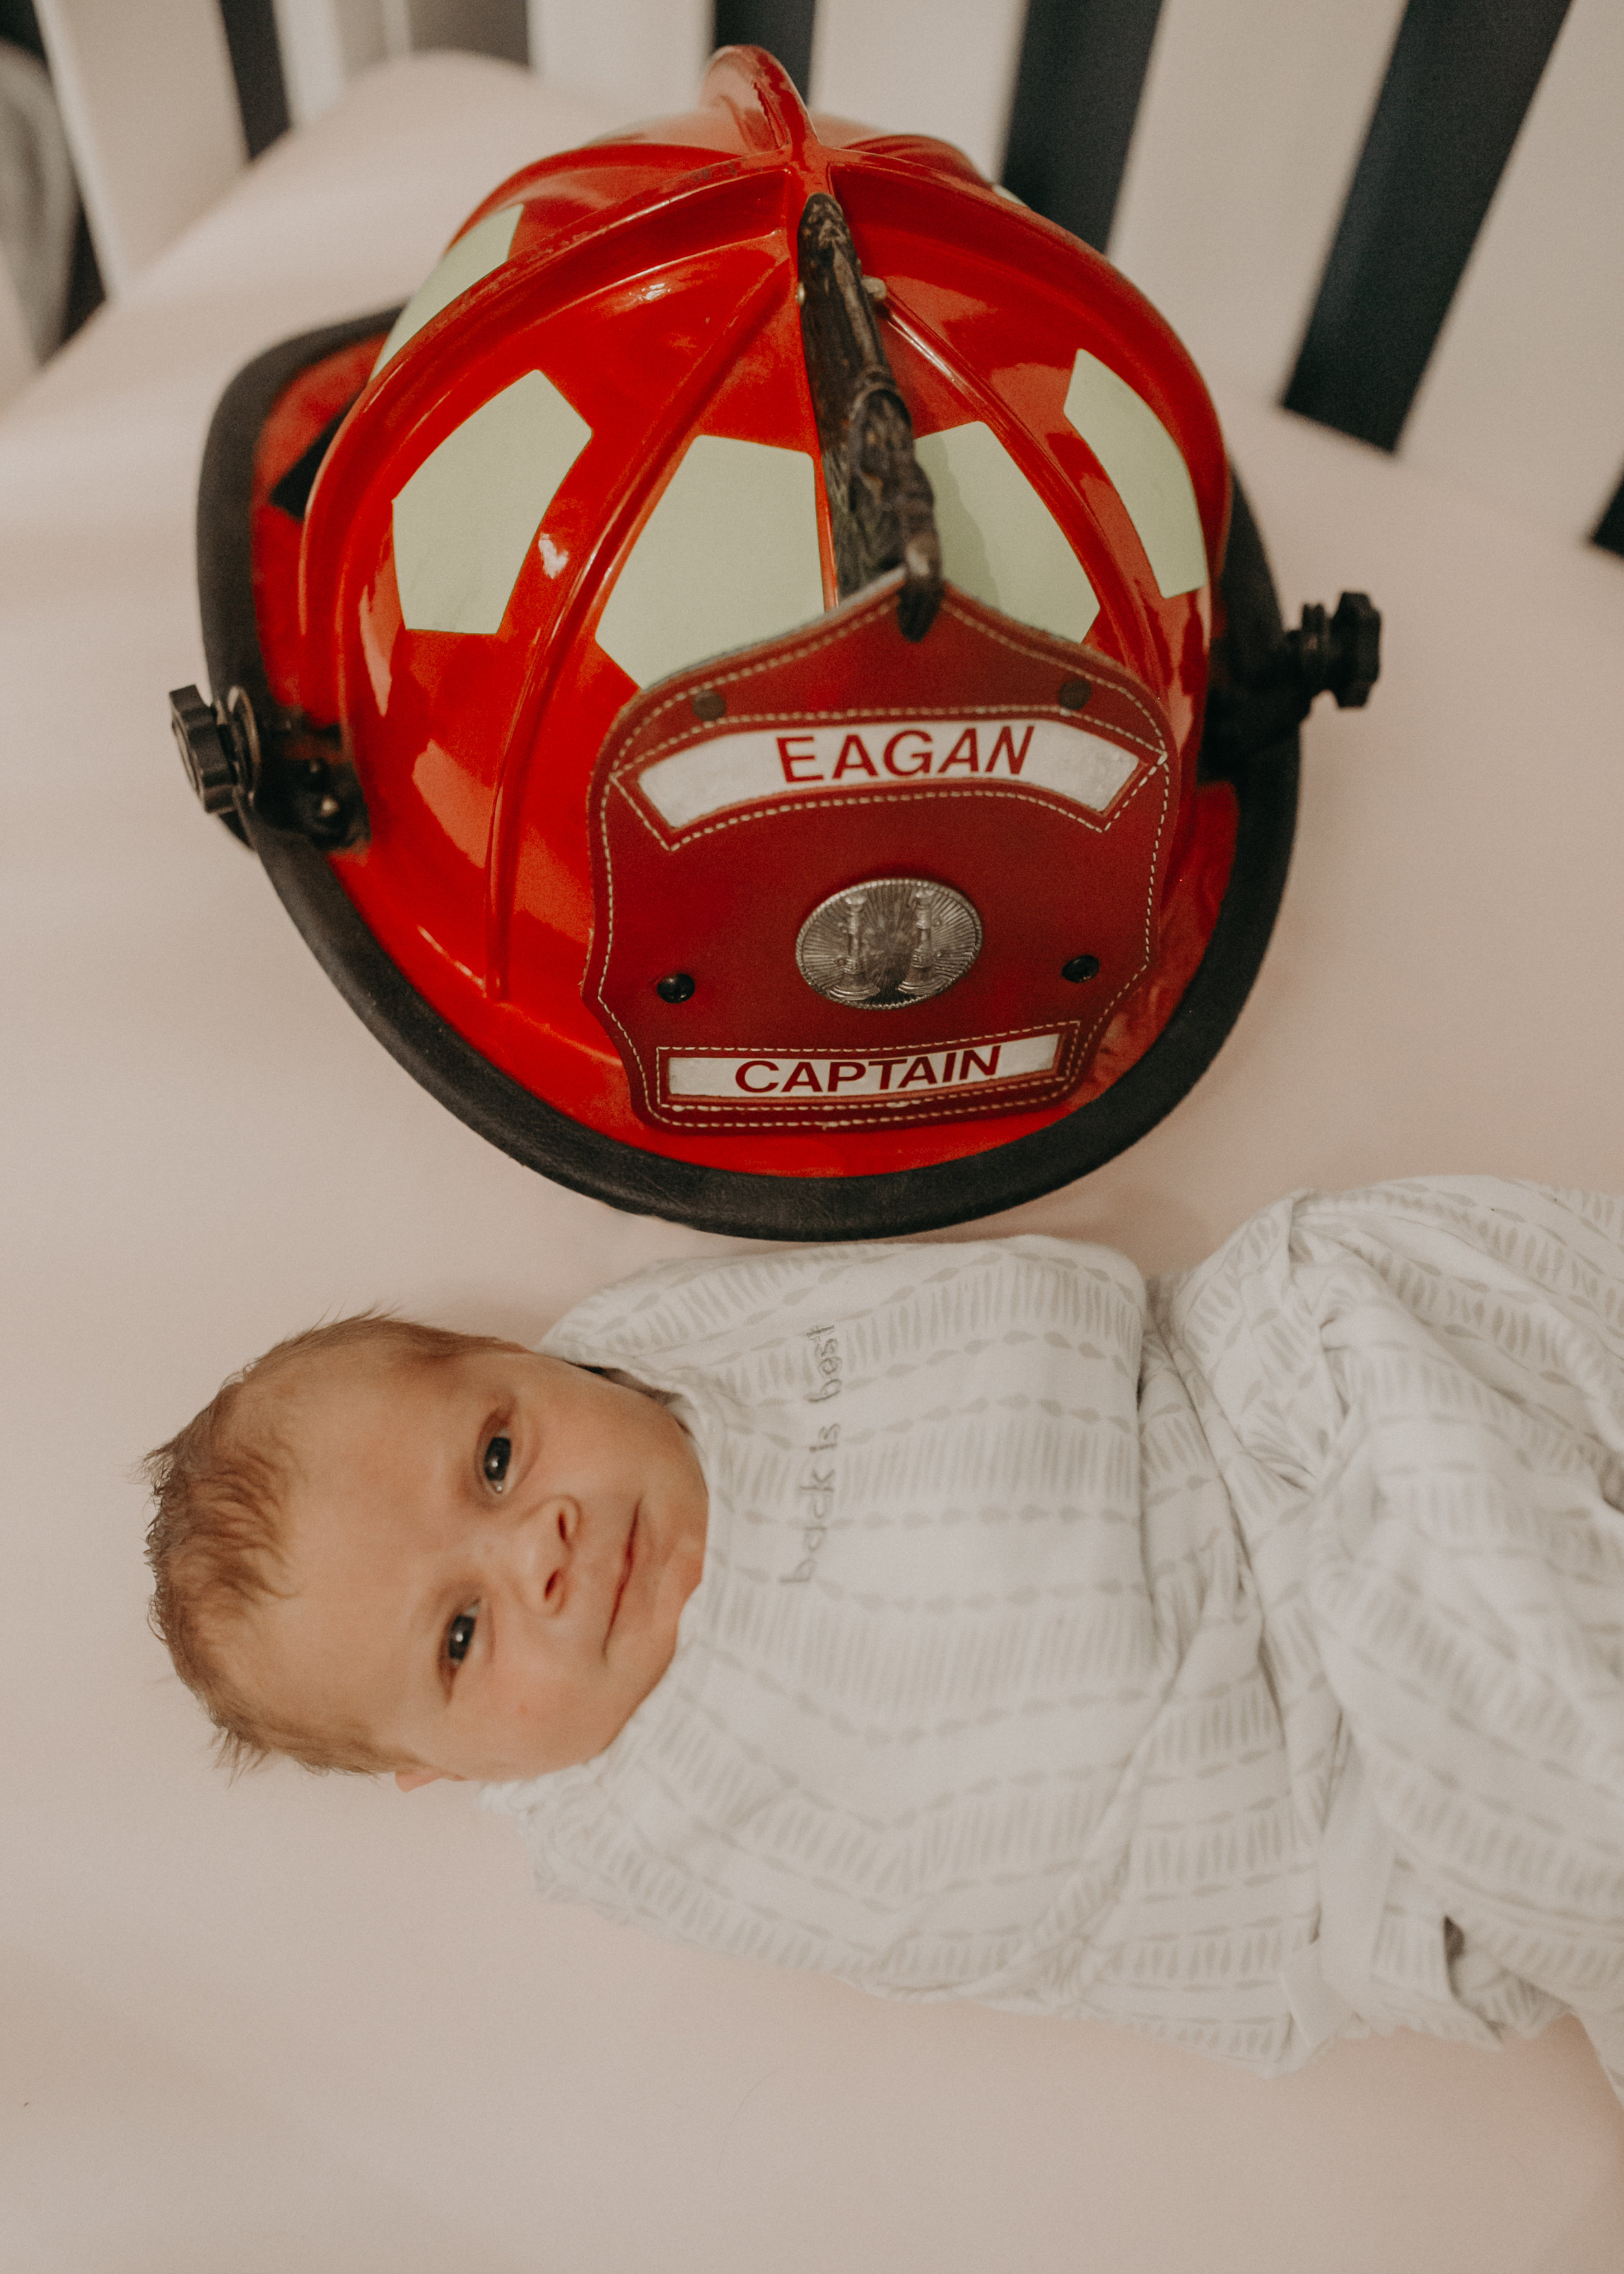  newborn baby poses by firefighter helmet in Eagan MN during newborn photo session 